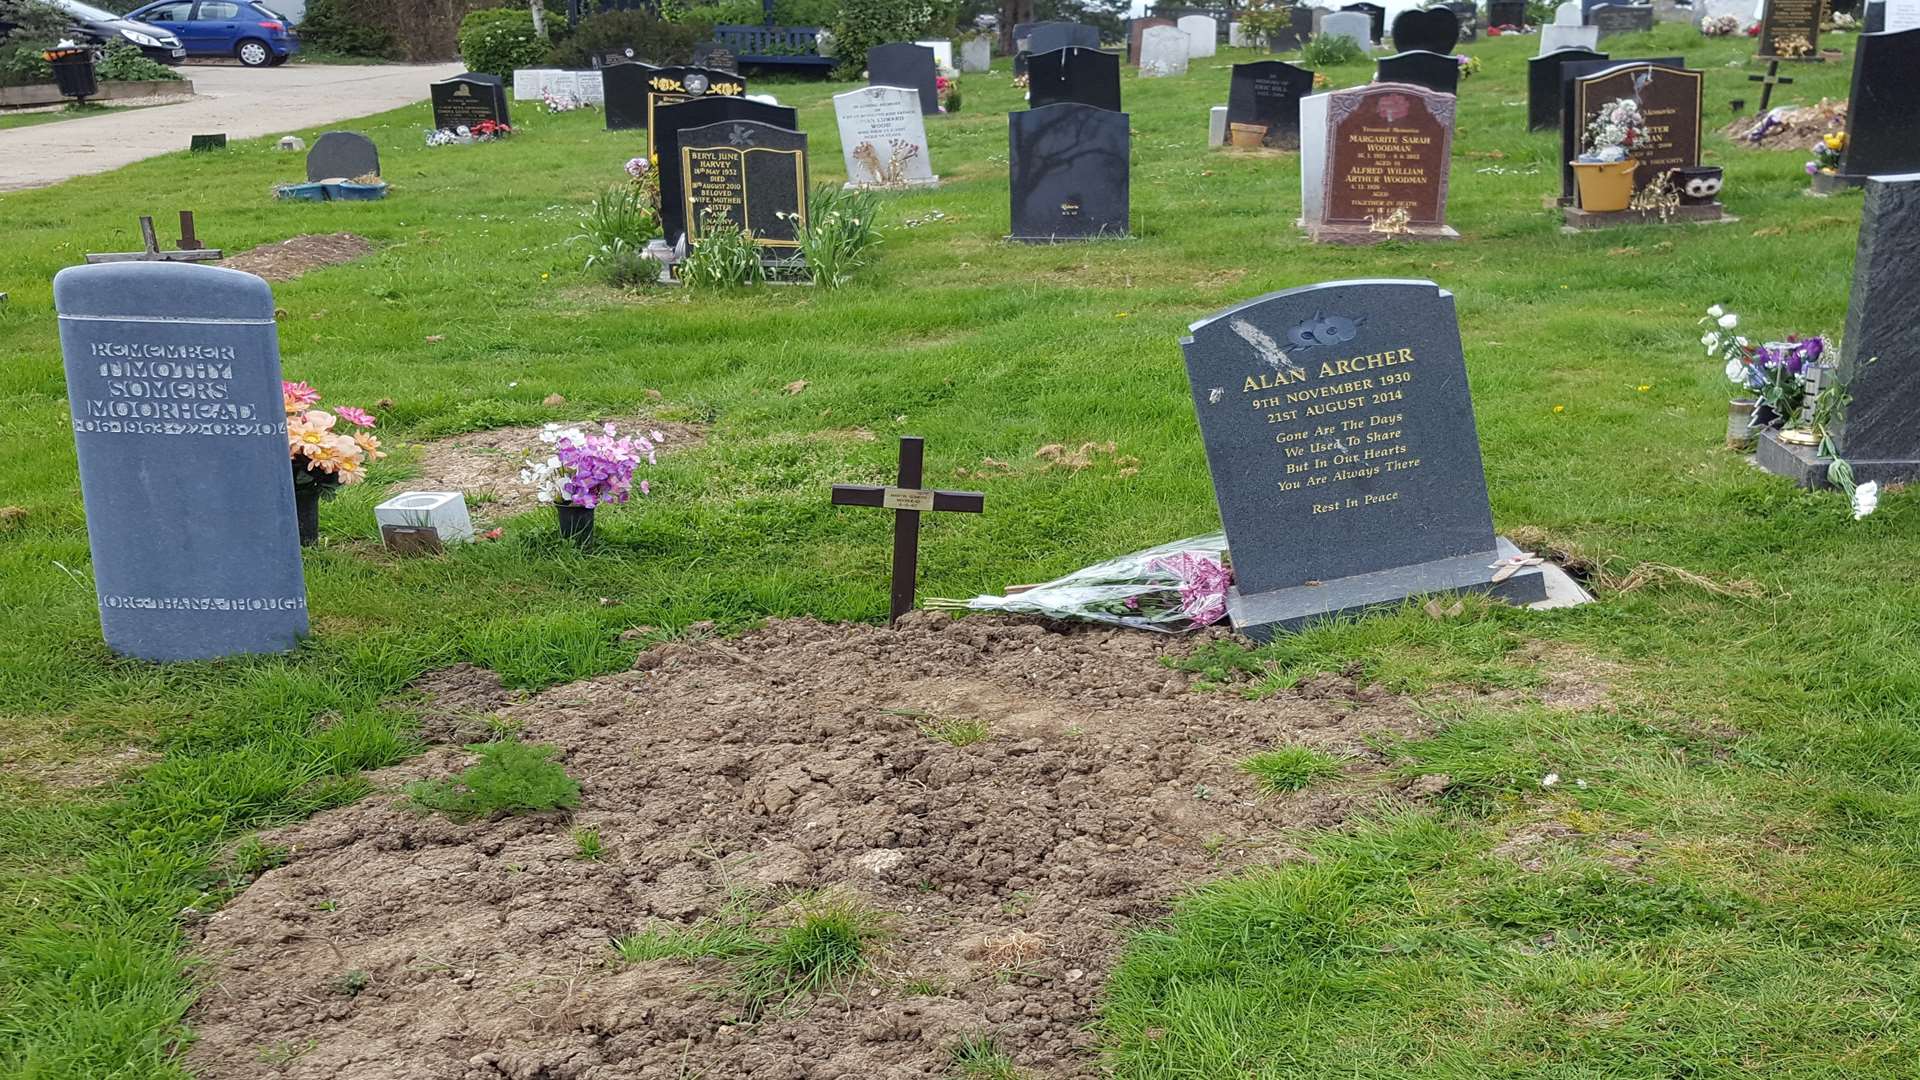 Alan Archer's headstone is now toppling over.